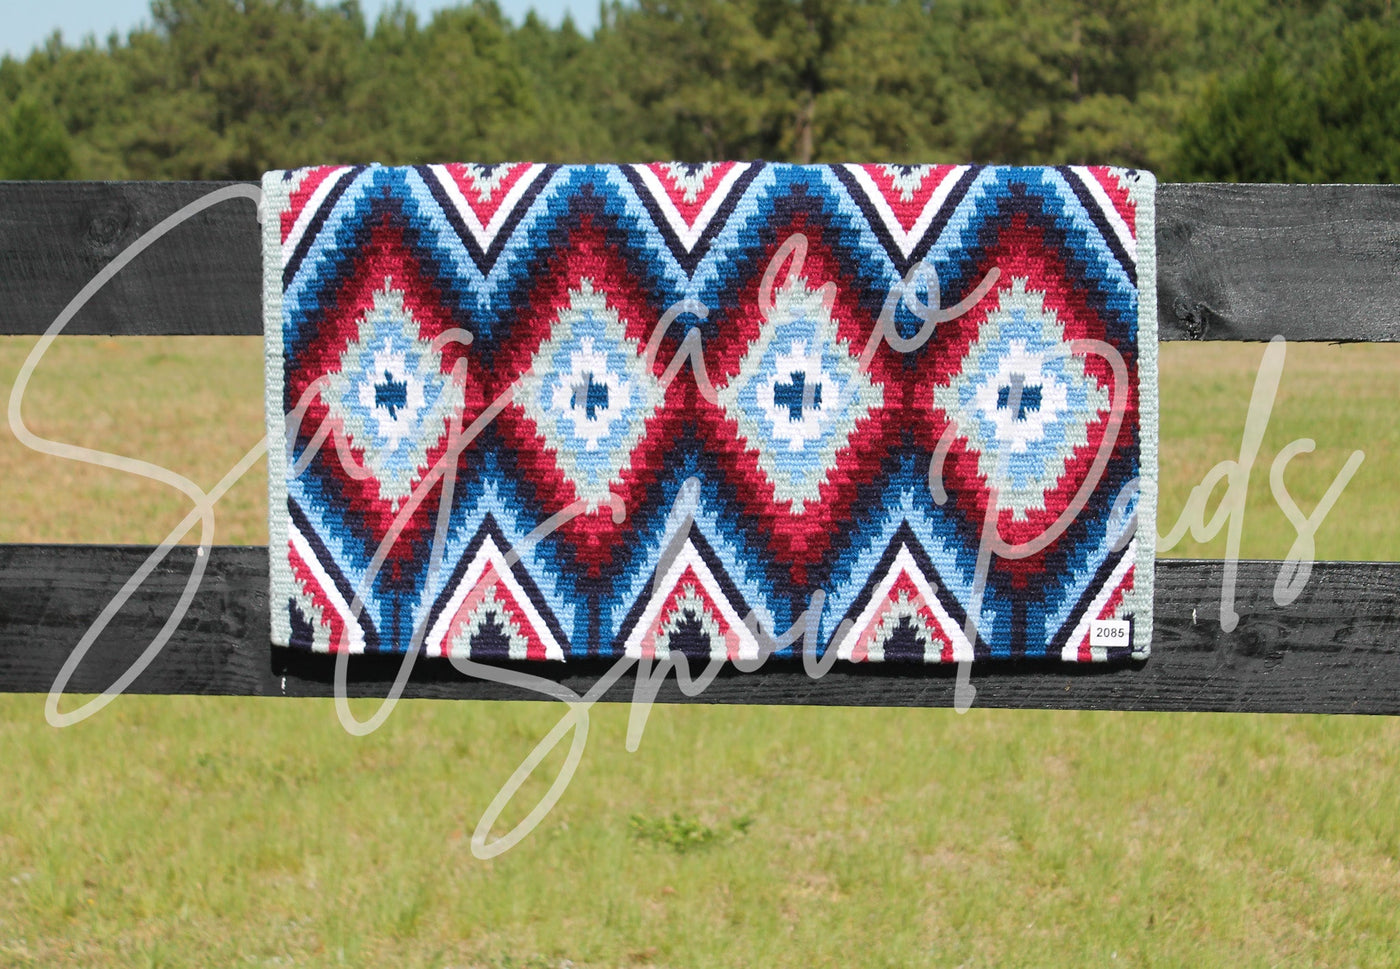 #2085 "X-Factor 2.0" Ranch Pad - Re-Order